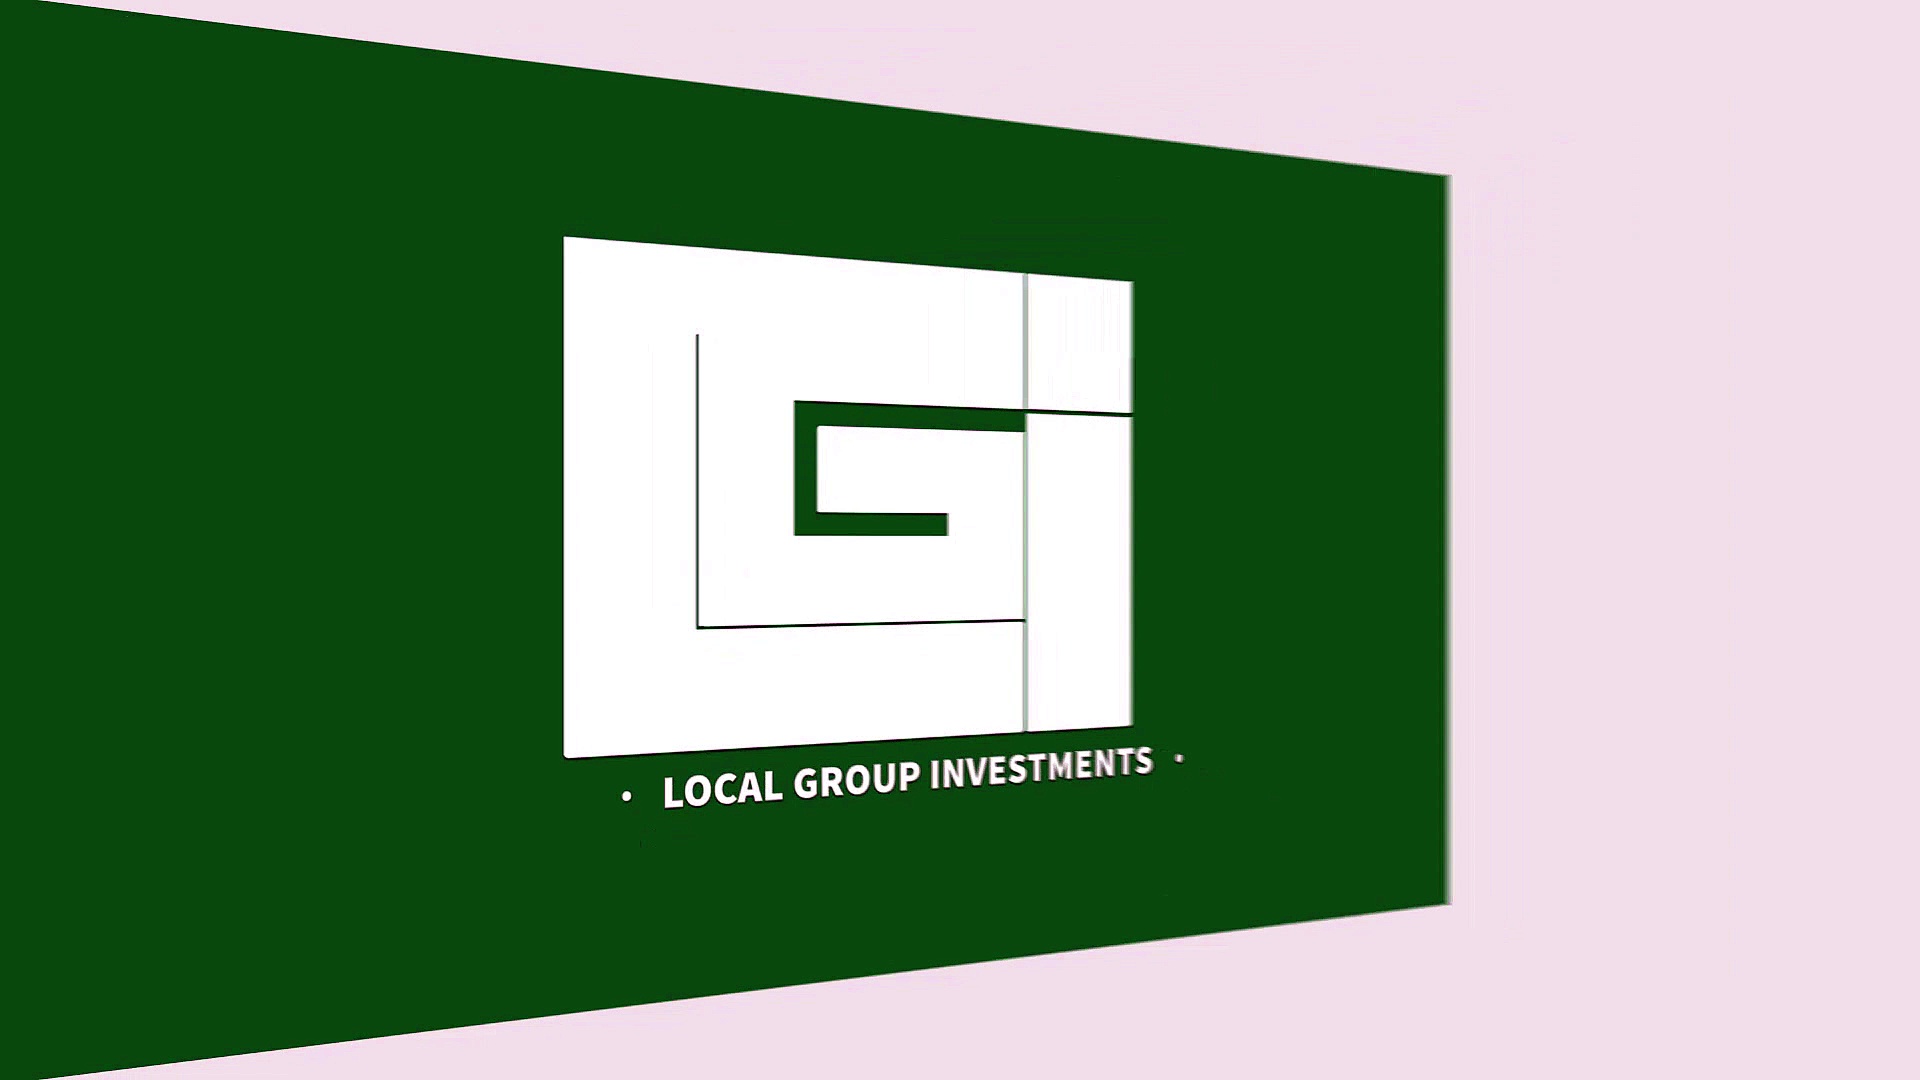 Local Group Investments